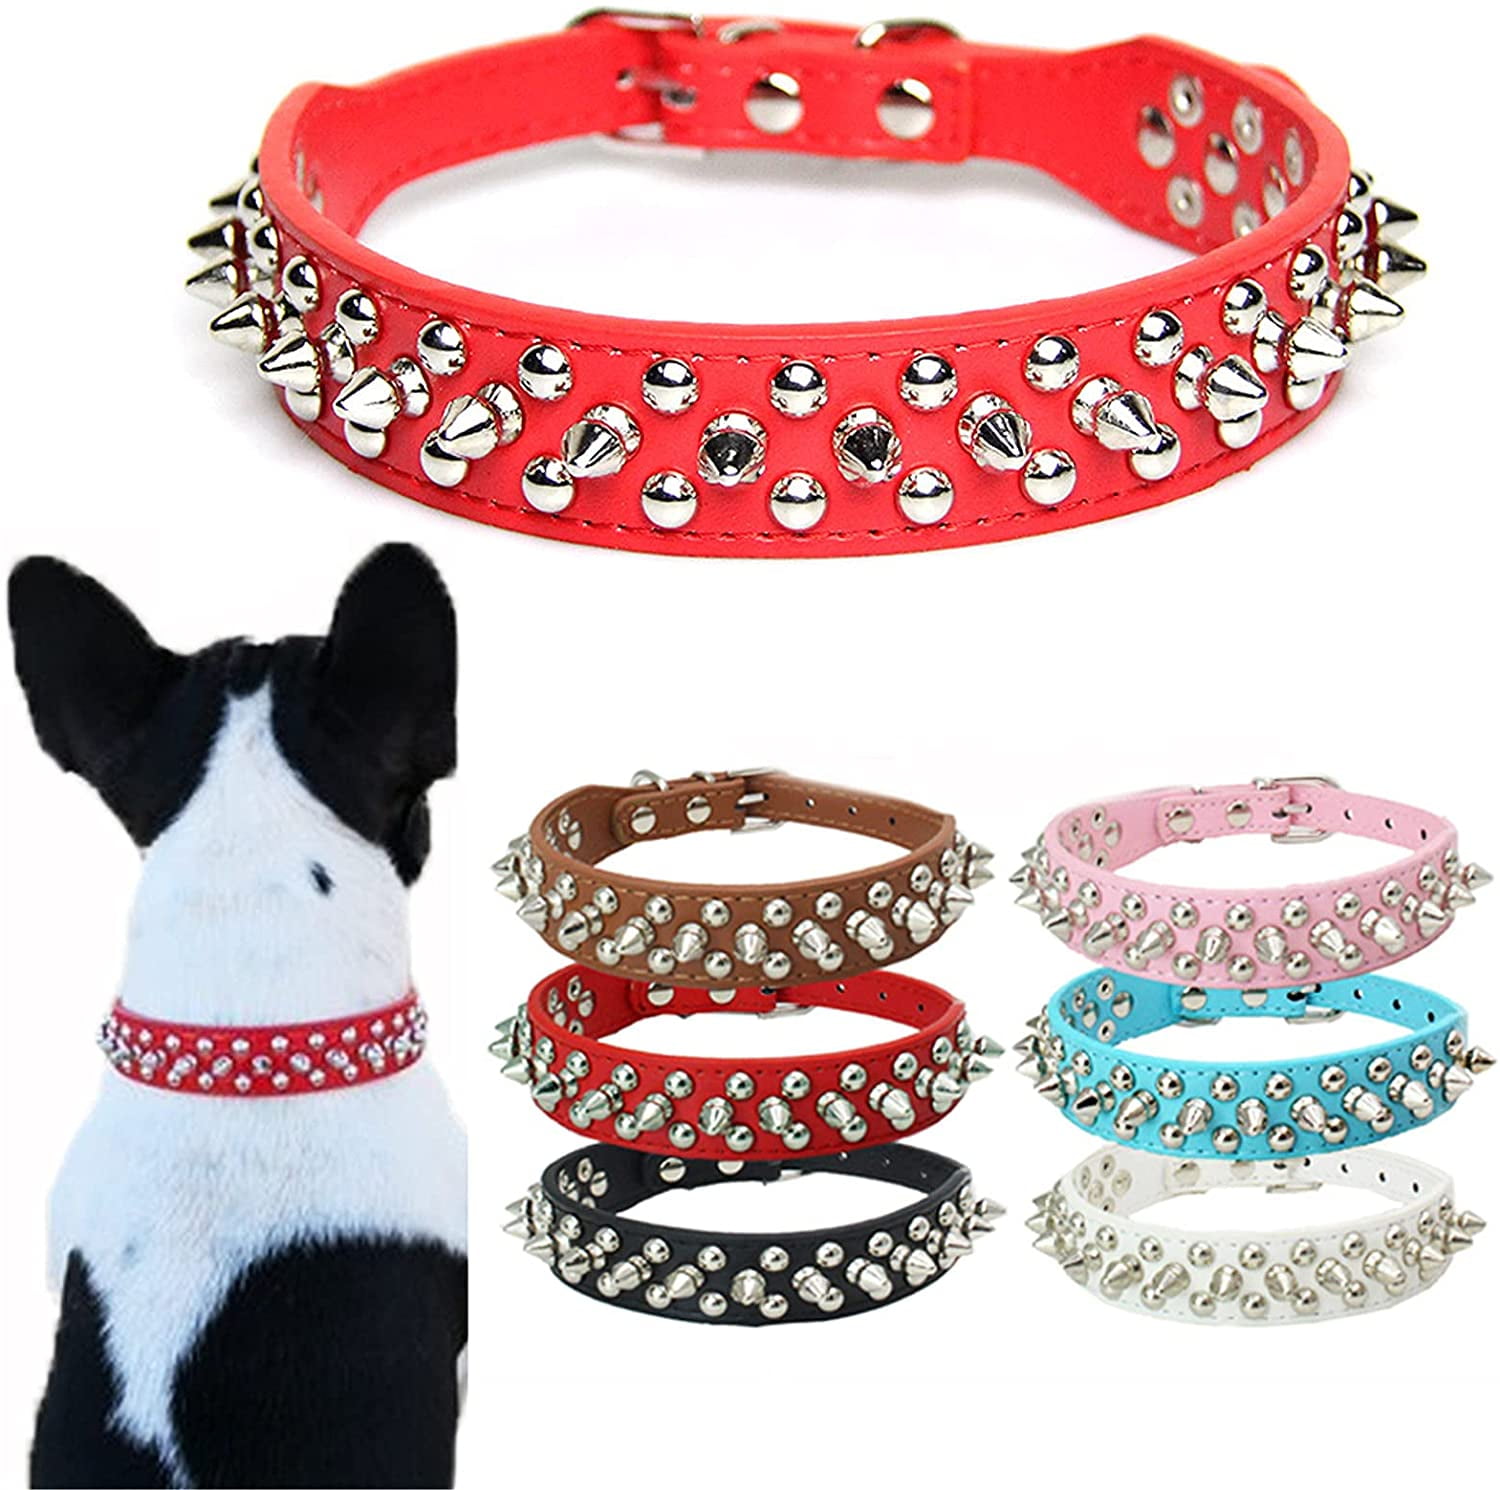 Studded Small Spiked Rivet Dog Pet Leather Collar Pink Red Black Purple Small XS 